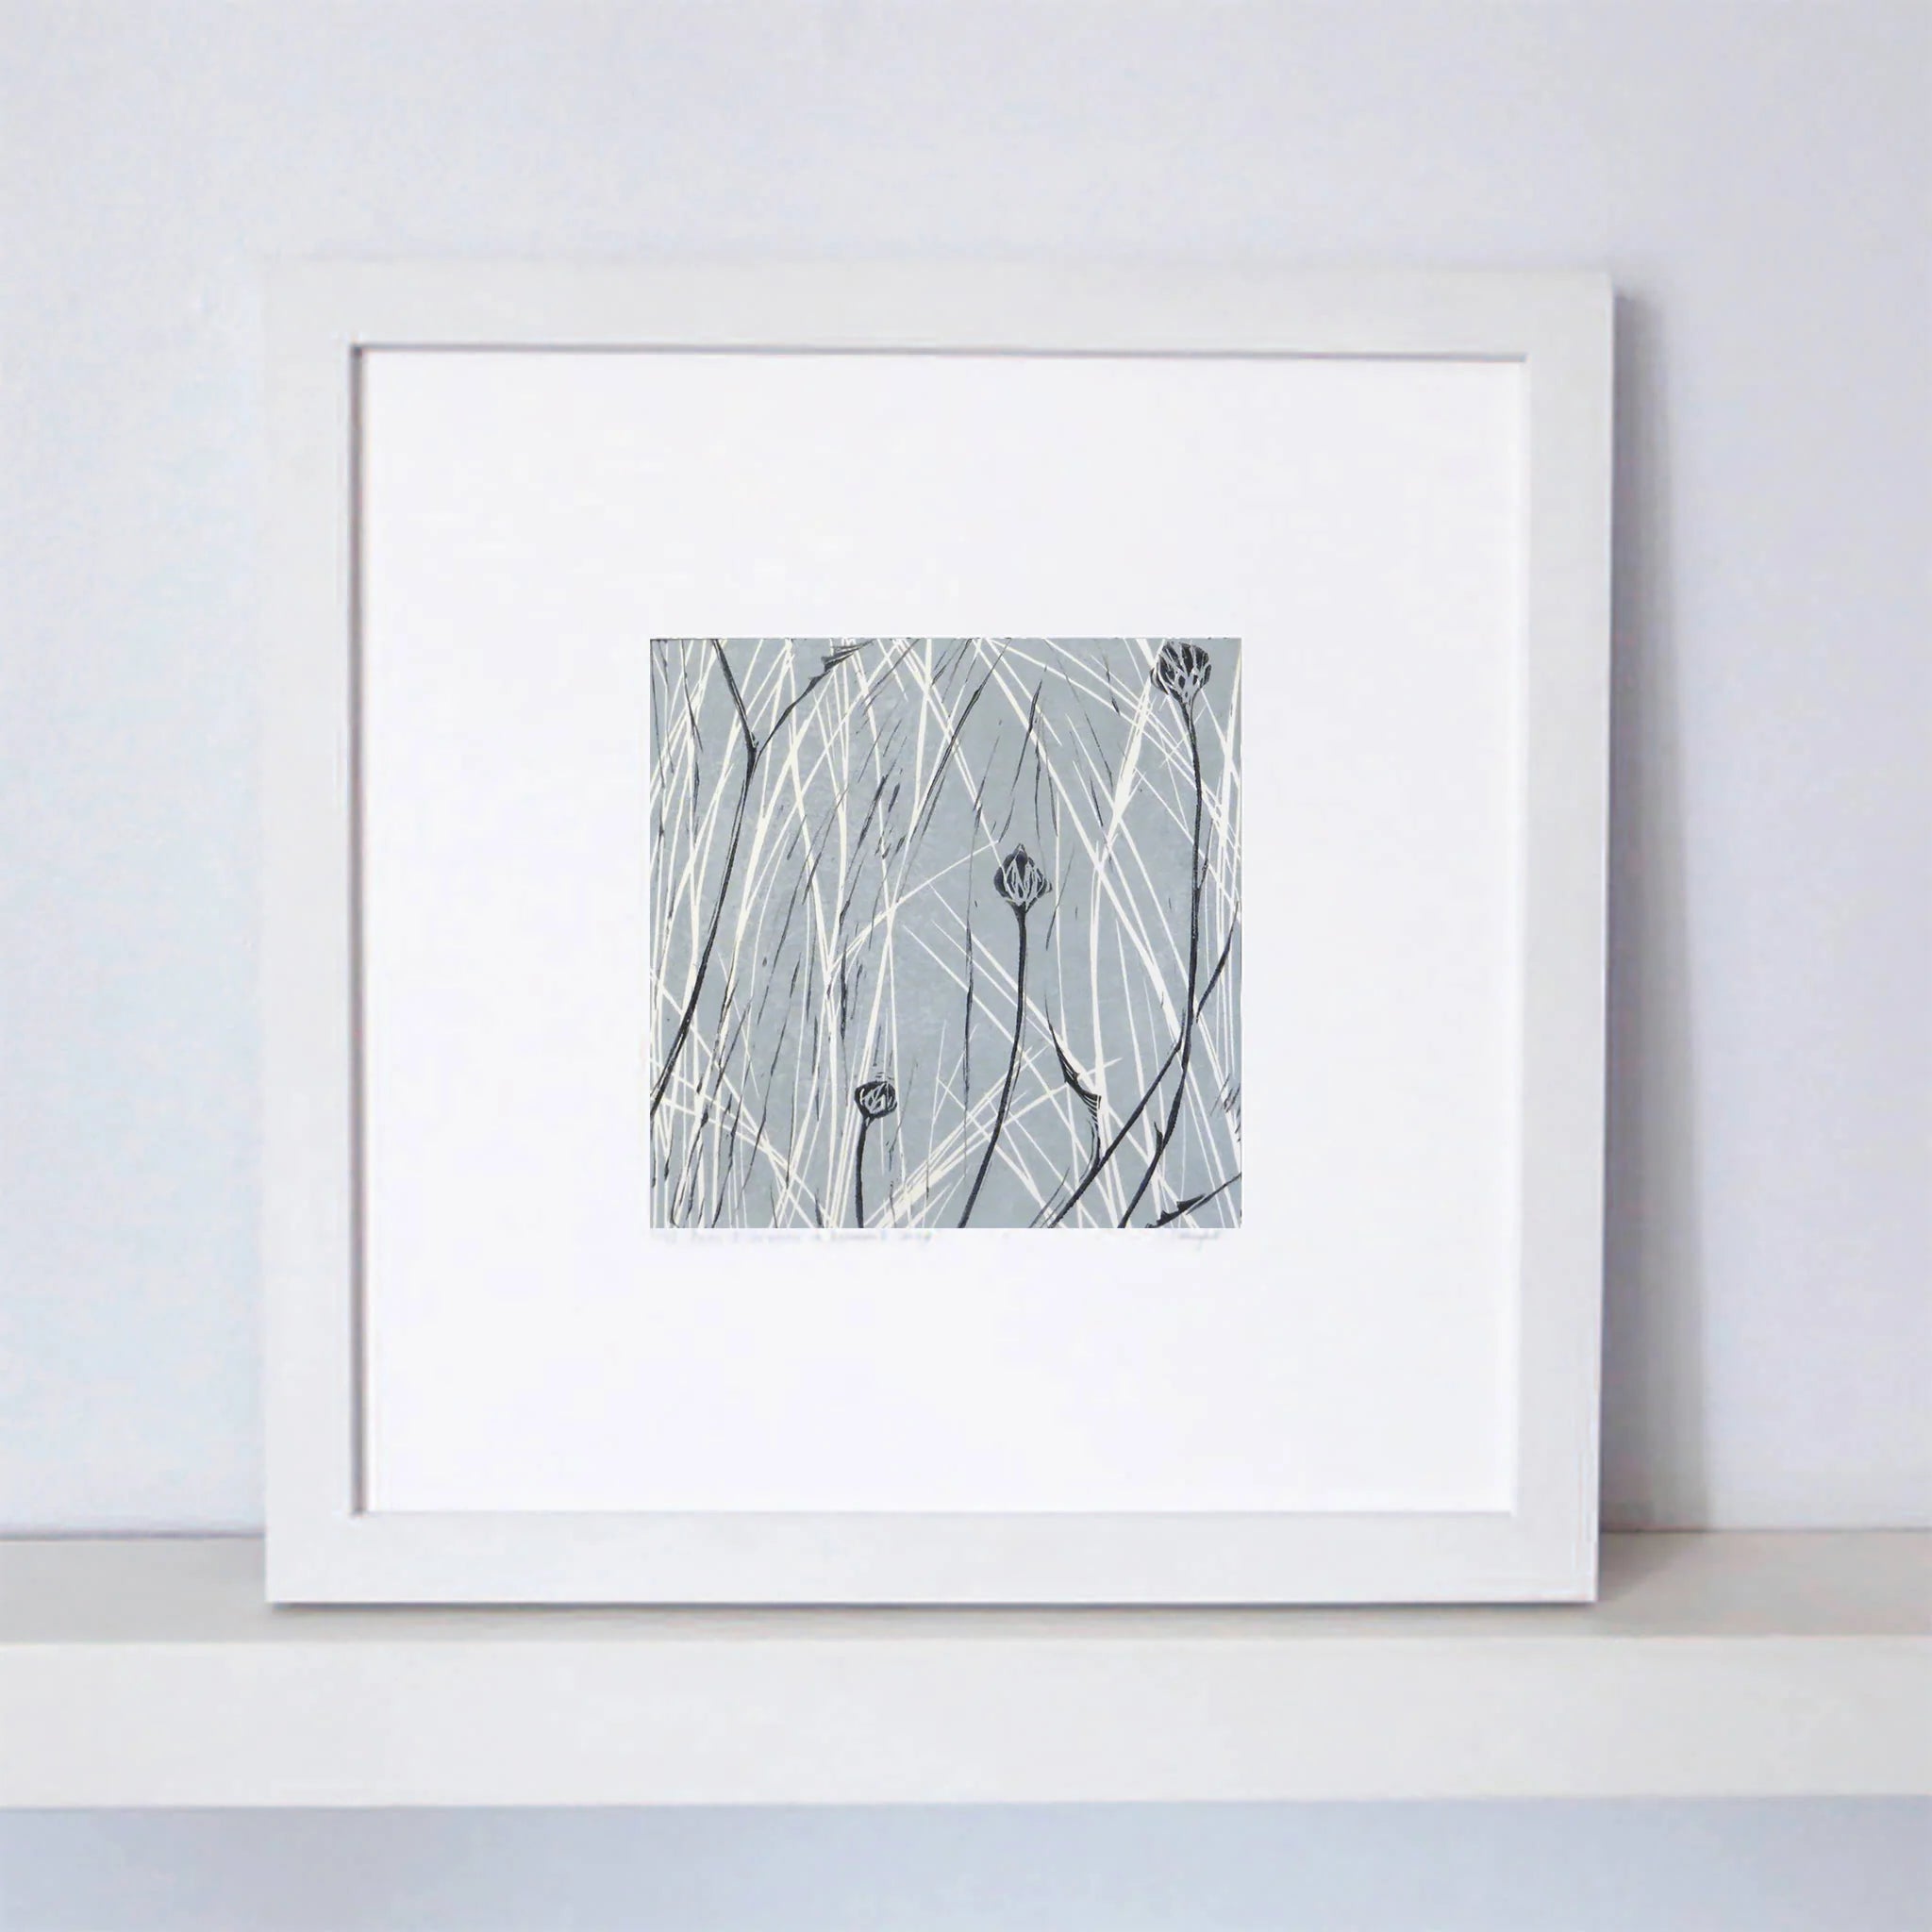 From linocut tryptic in parma grey by Sarah Knight